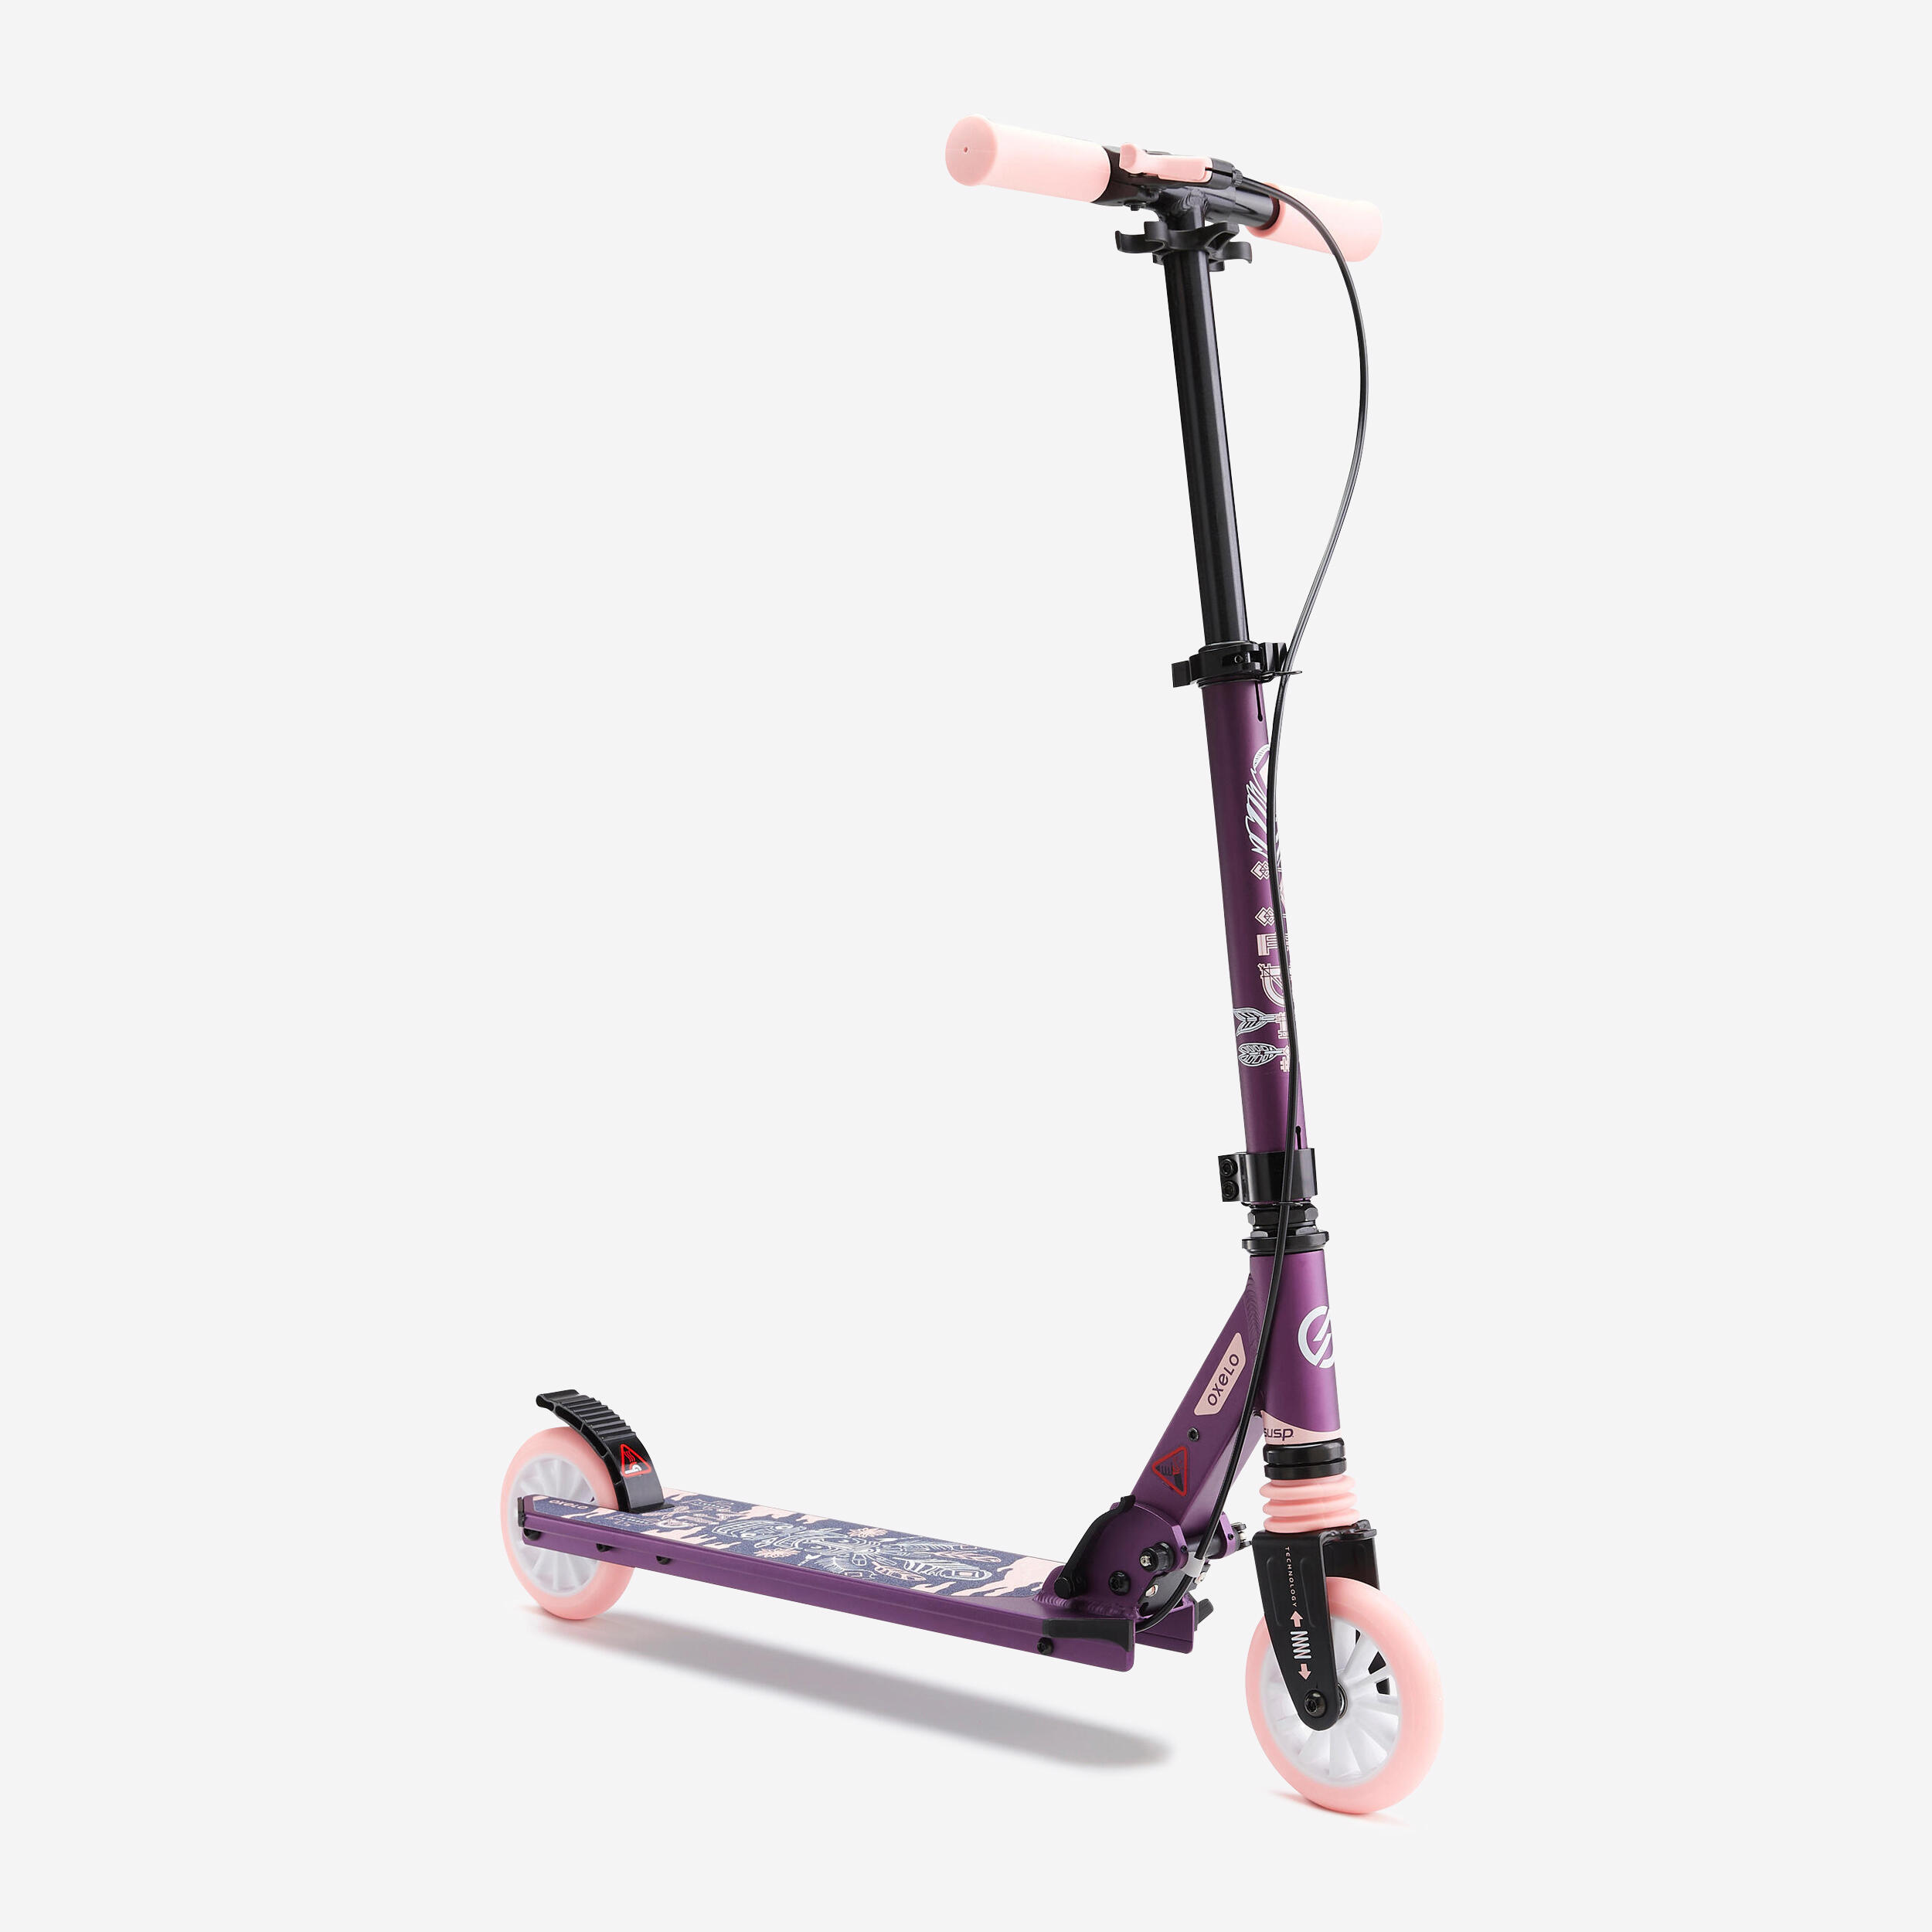 OXELO Mid 5 Kids' Scooter with Handlebar Brake and Suspension - Purple